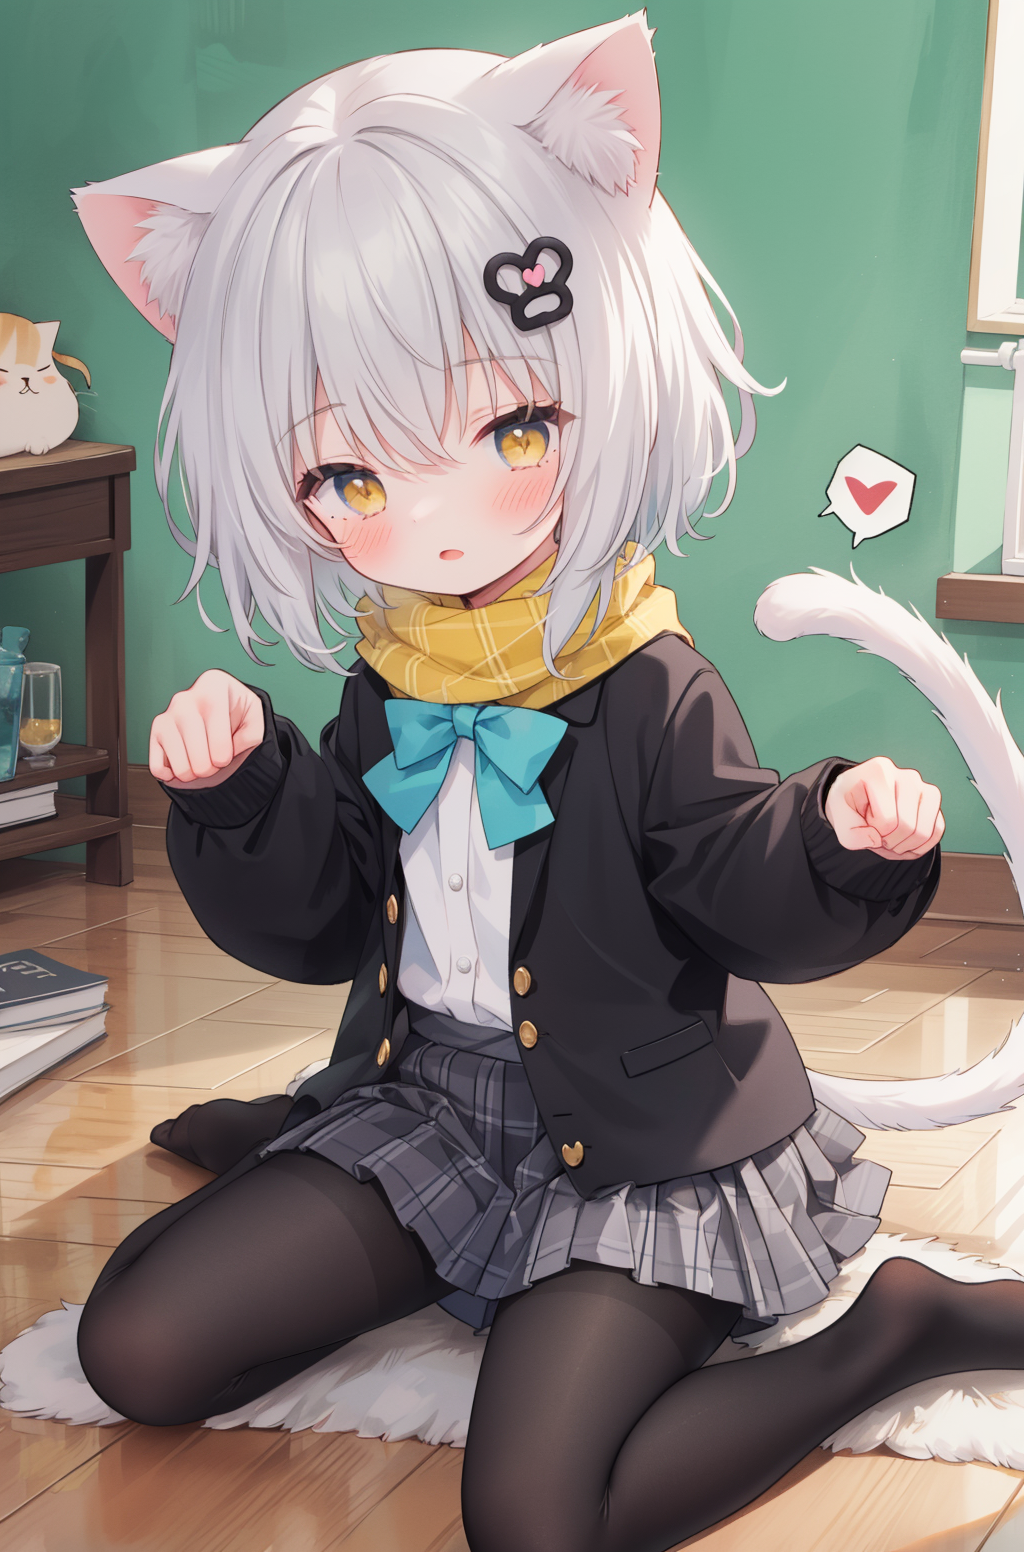 Premium Photo  Cute Anime cat girl with cat ears and a tail wearing a  sailor outfit on colorful background with playful details like hearts and  paw prints manga style illustration generative